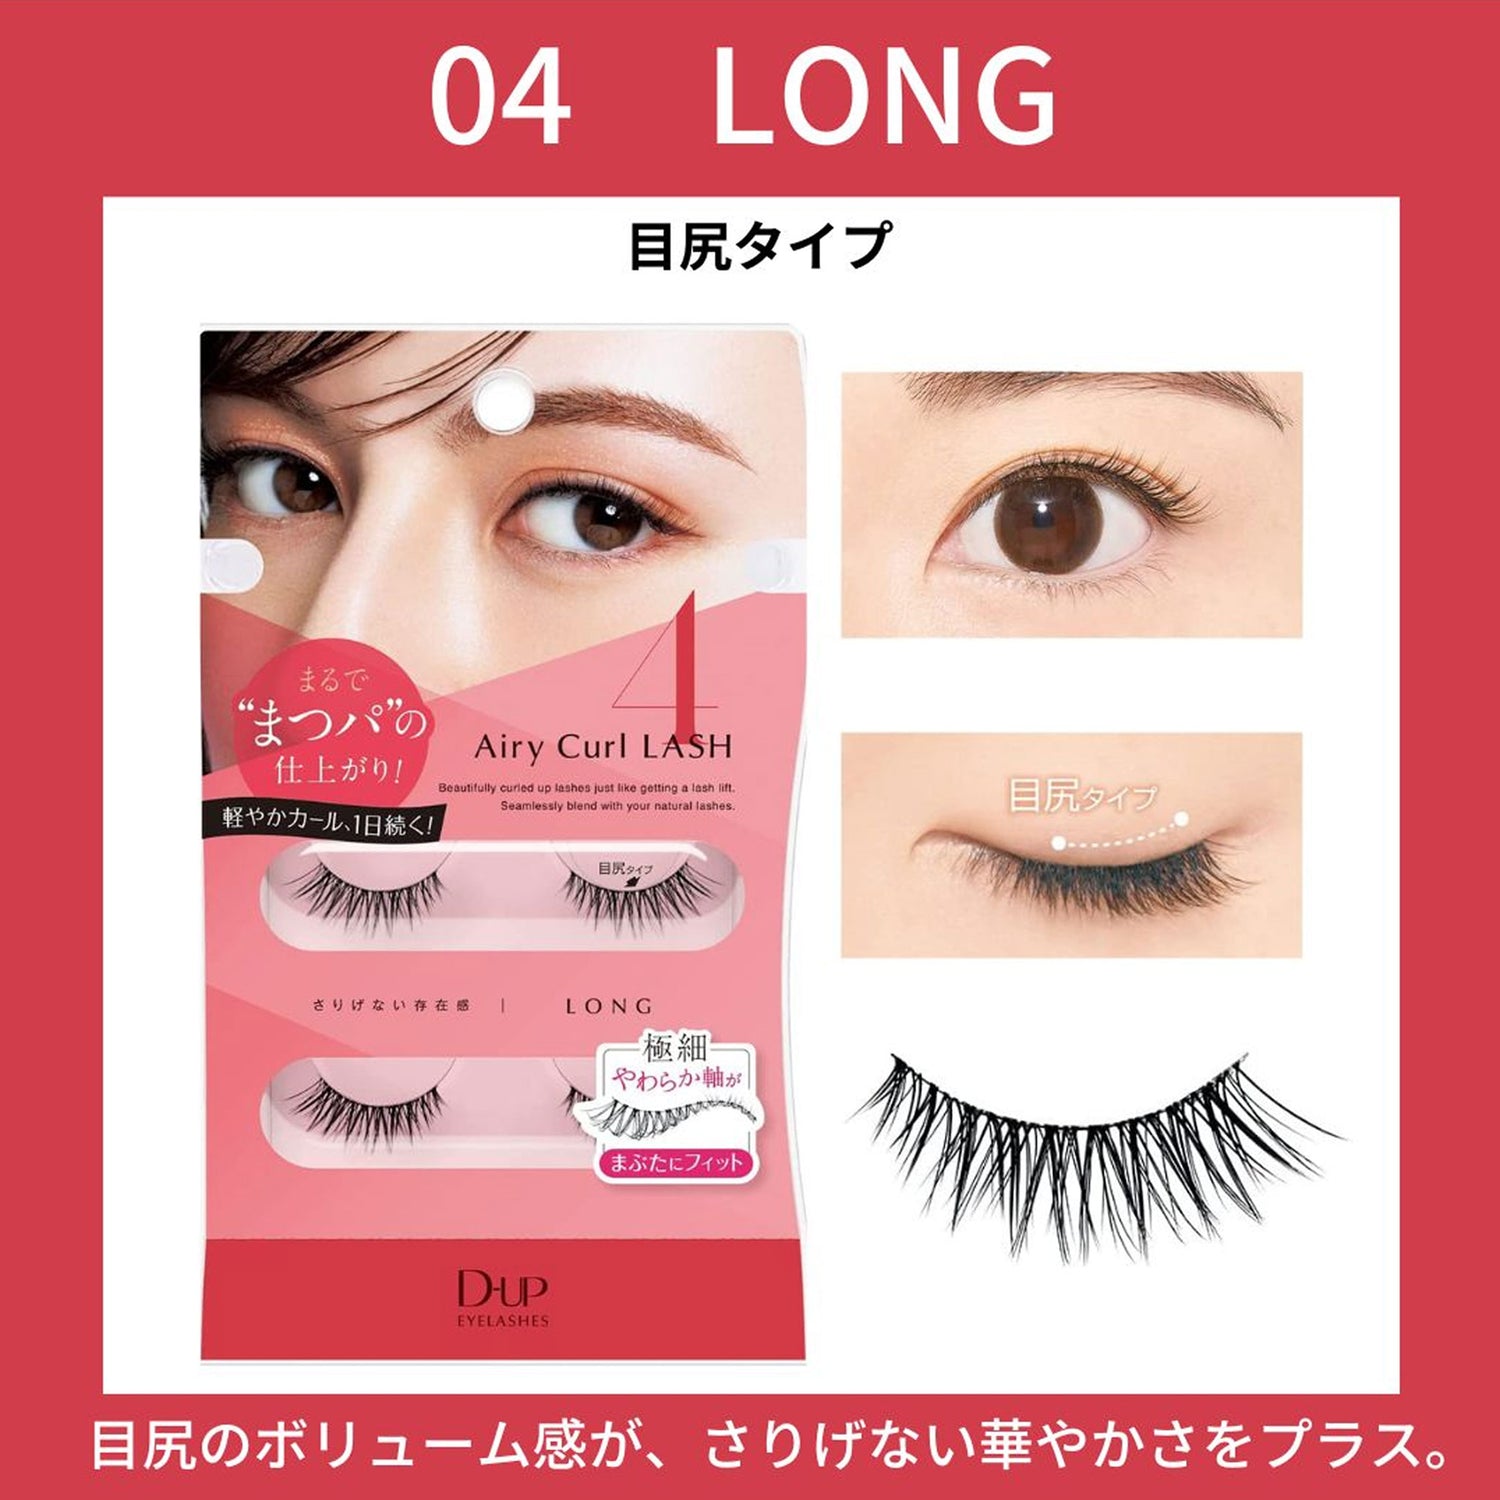 D.UP Eyelashes Airy Curl Lash